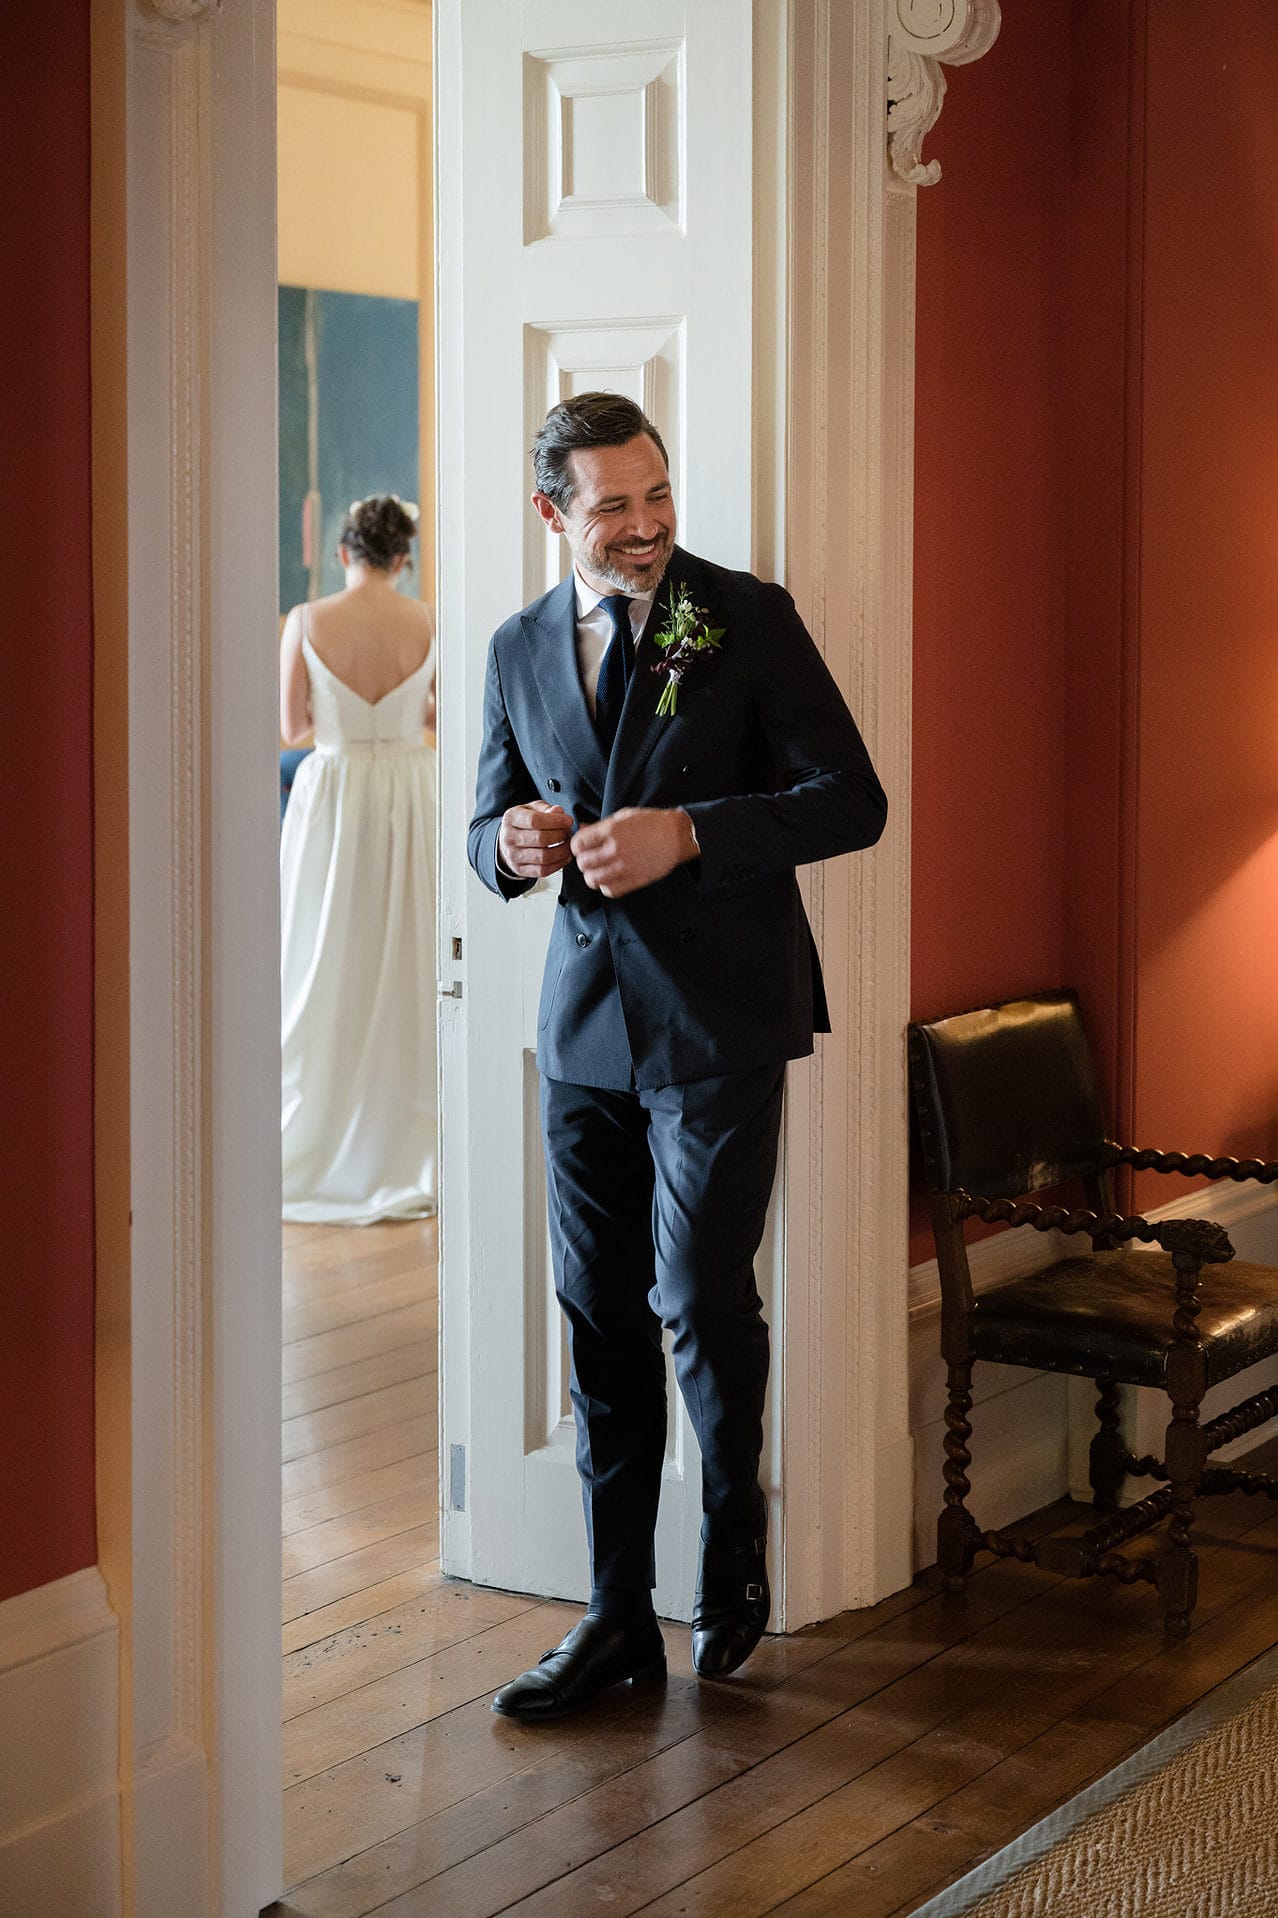 Groom standing in a doorway doing up his jacket with the back of the bride in the background